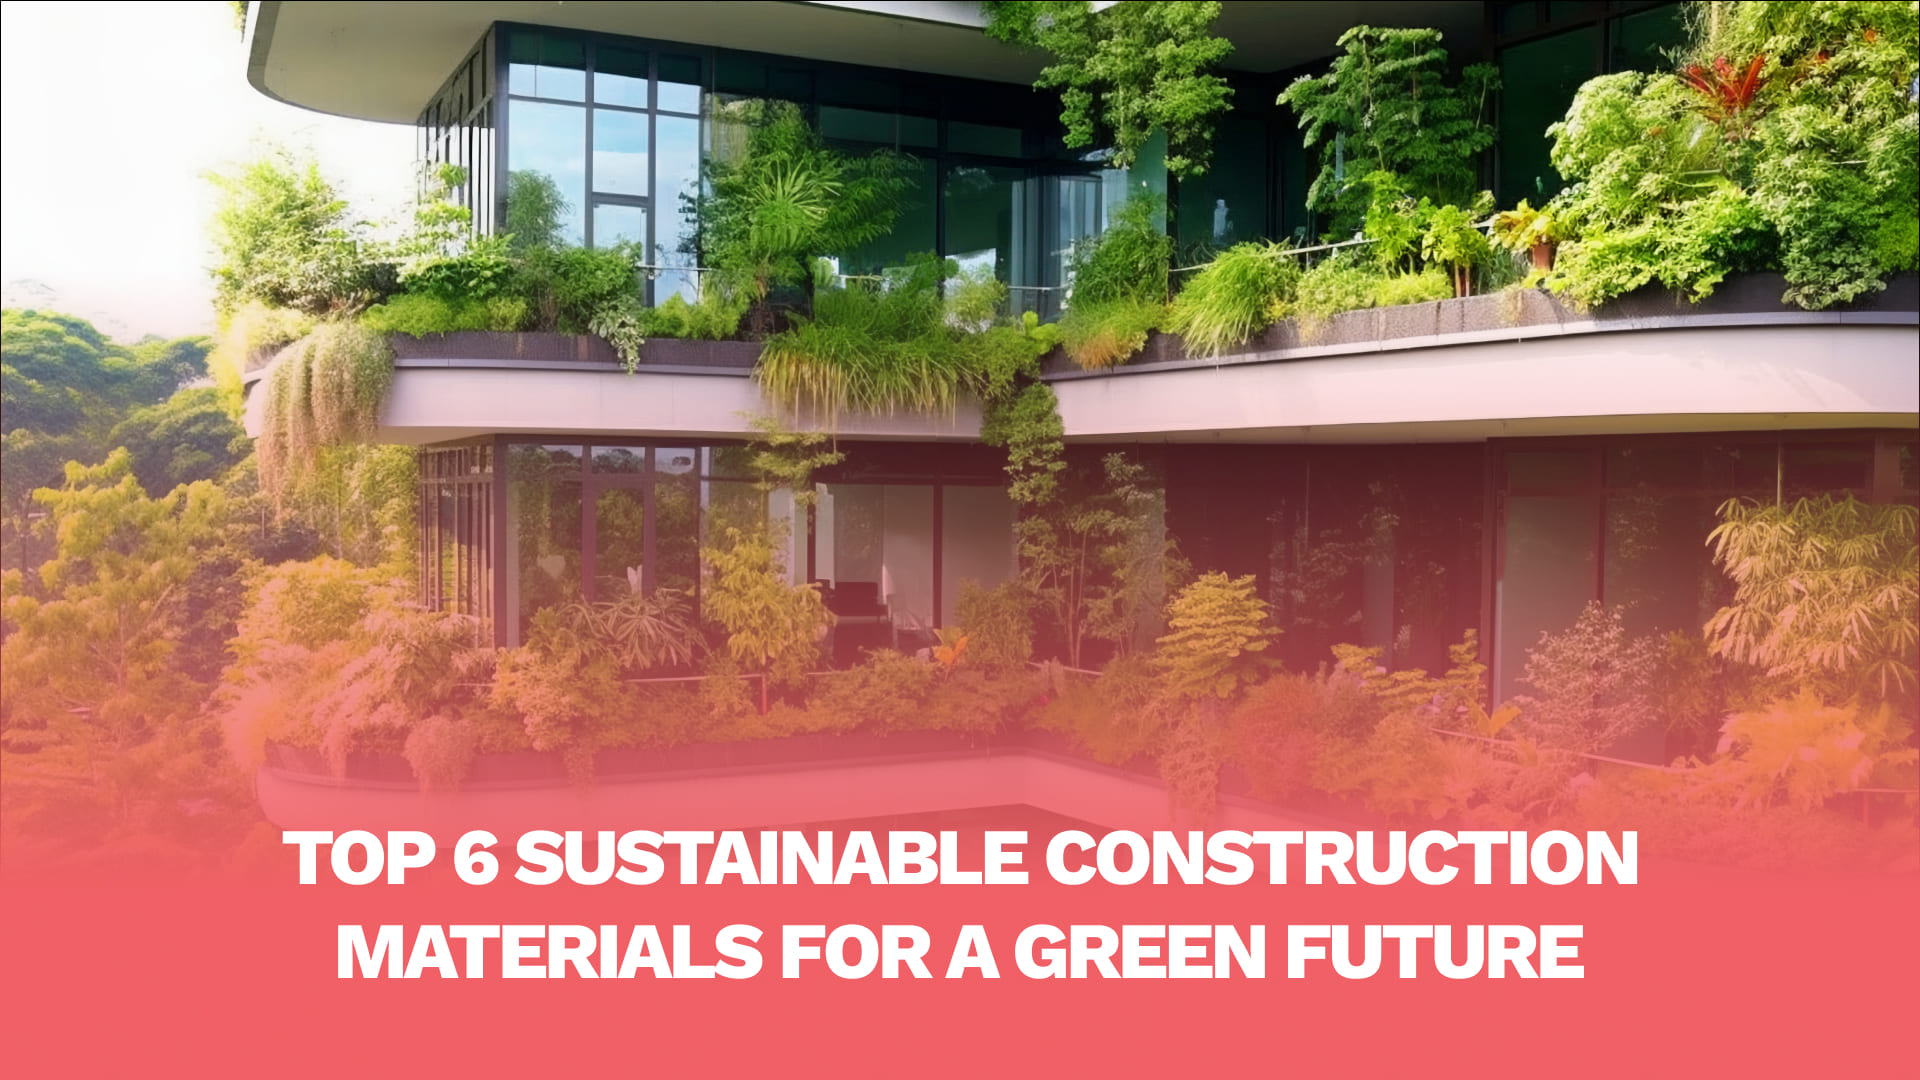 Top 6 Sustainable Construction Materials for a Green Future